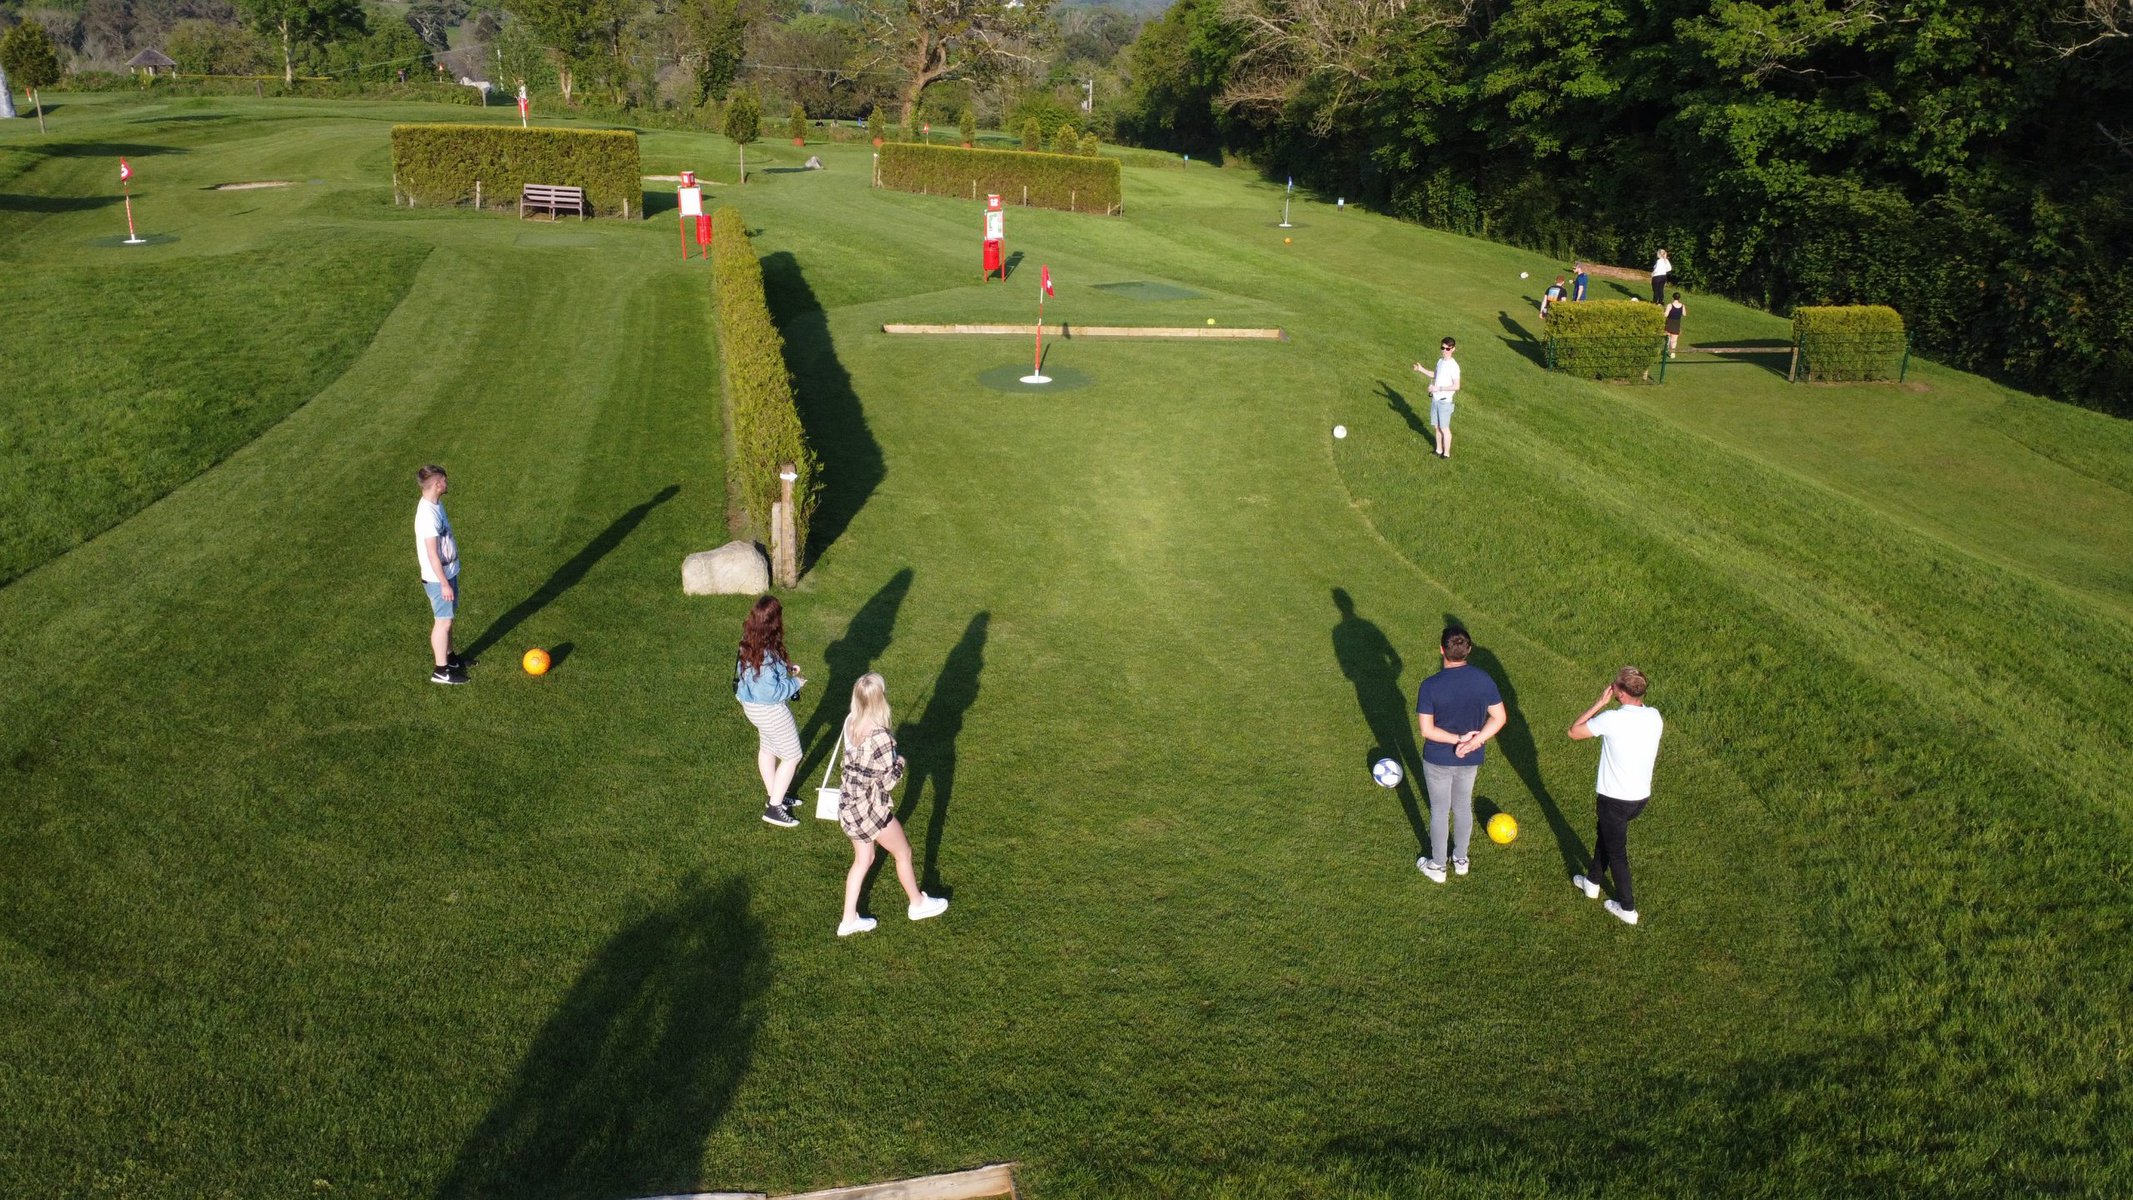 Great Outdoor family activity in Cornwall - FootballGolf